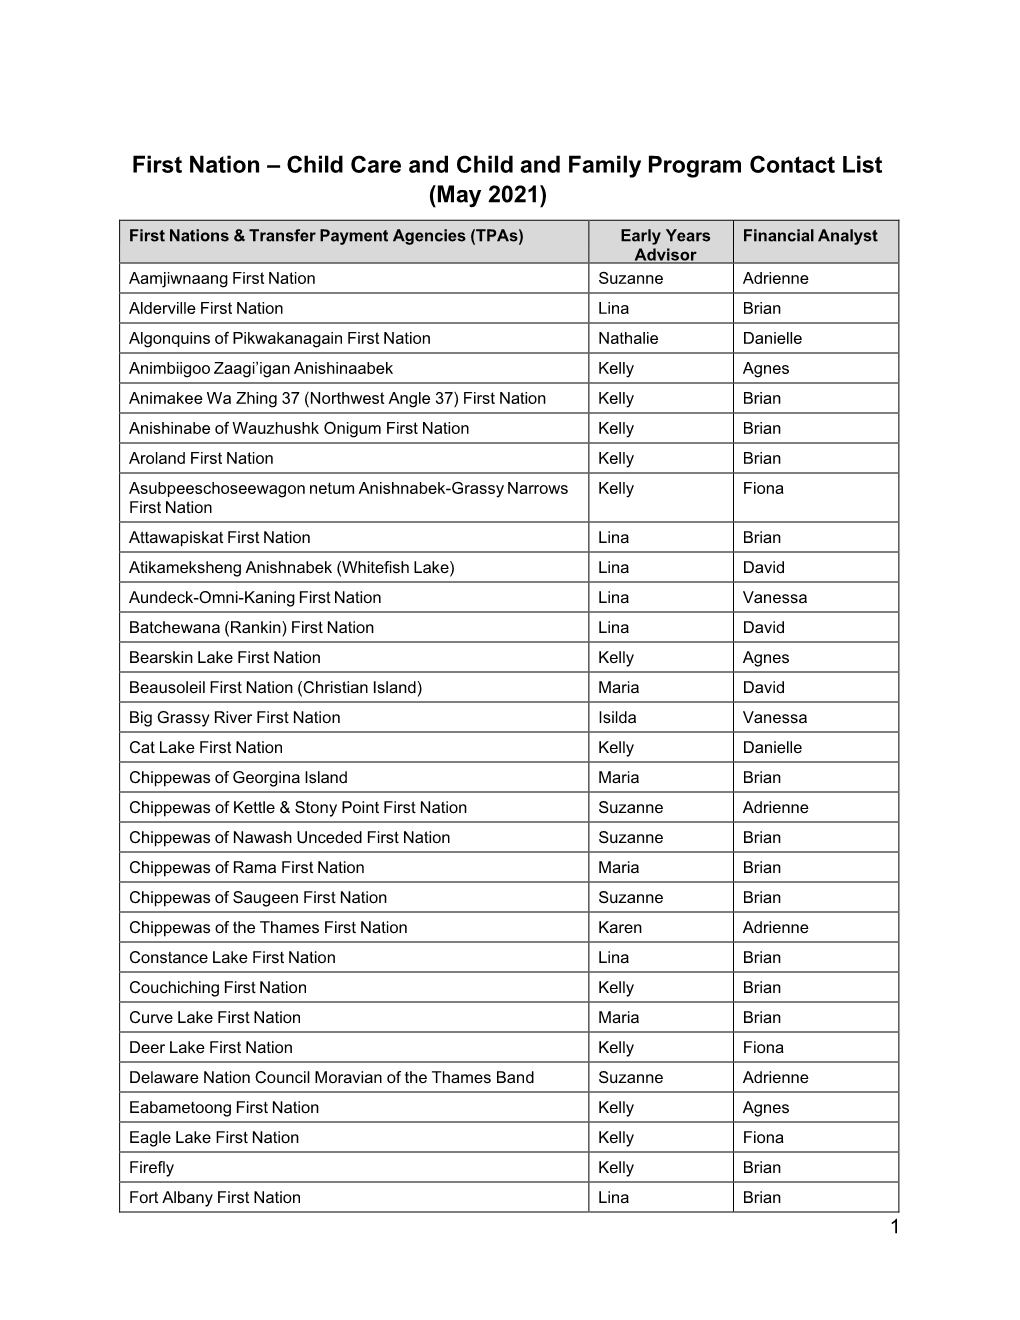 First Nation FAAB Child Care Contact List